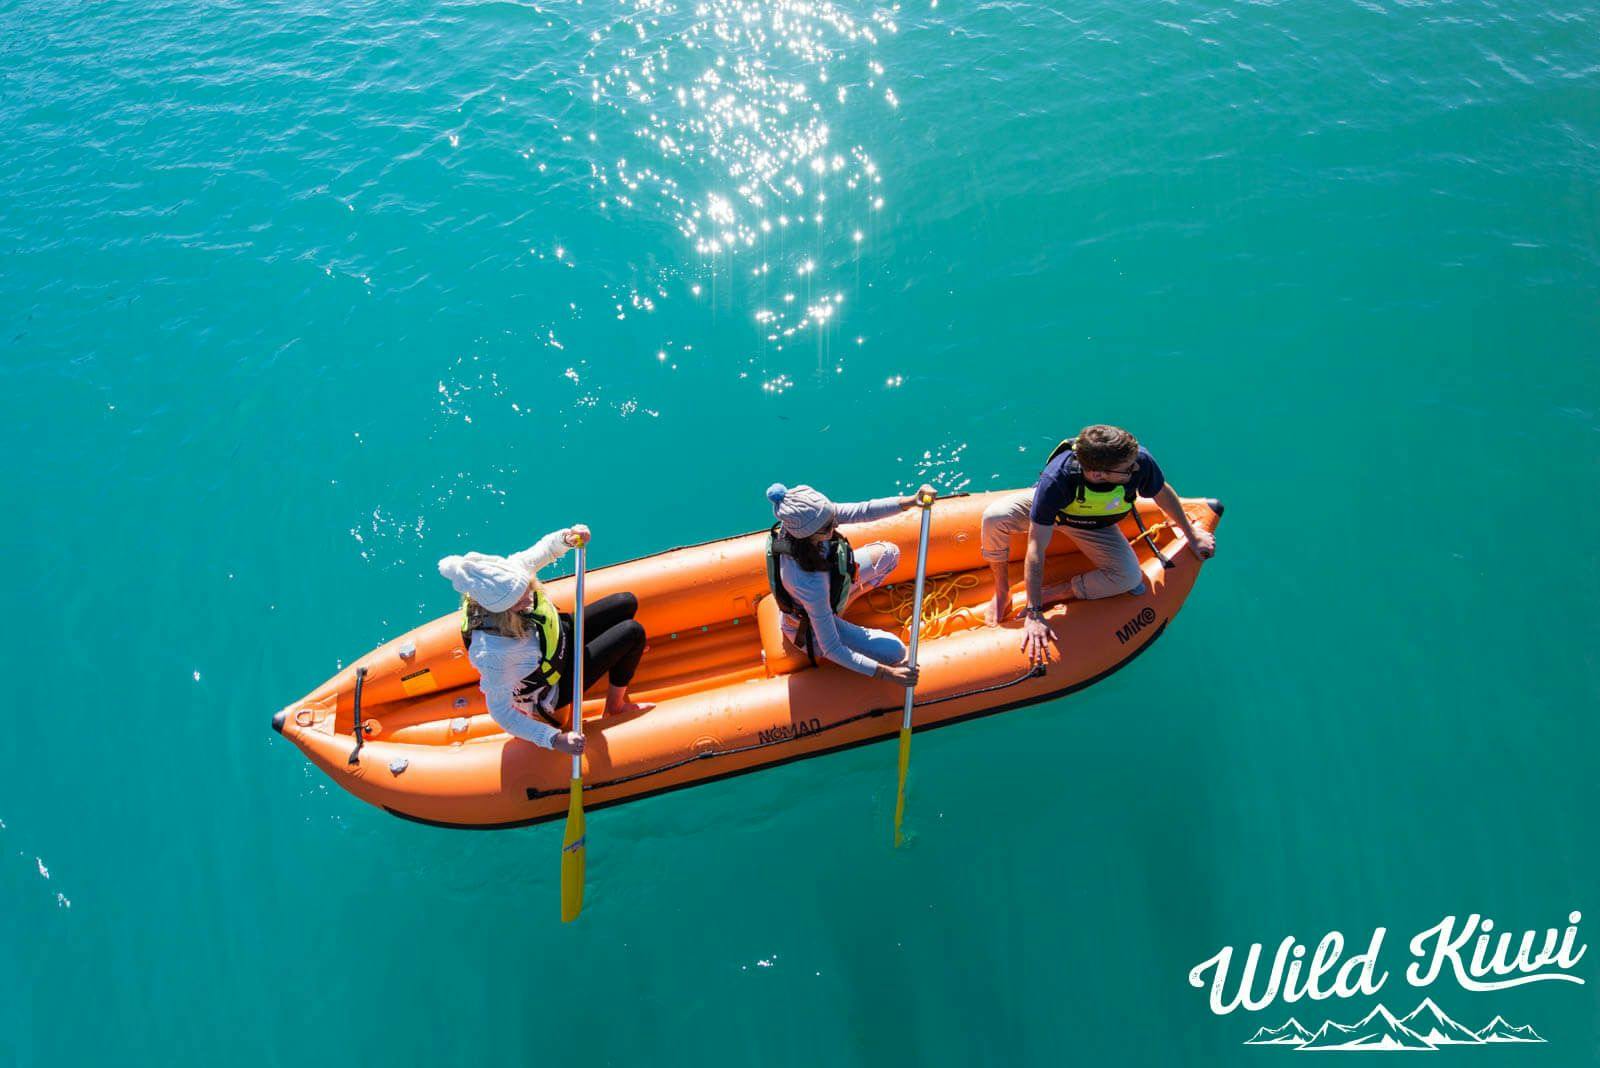 New Zealand's top activities - Visit lakes and paddle out